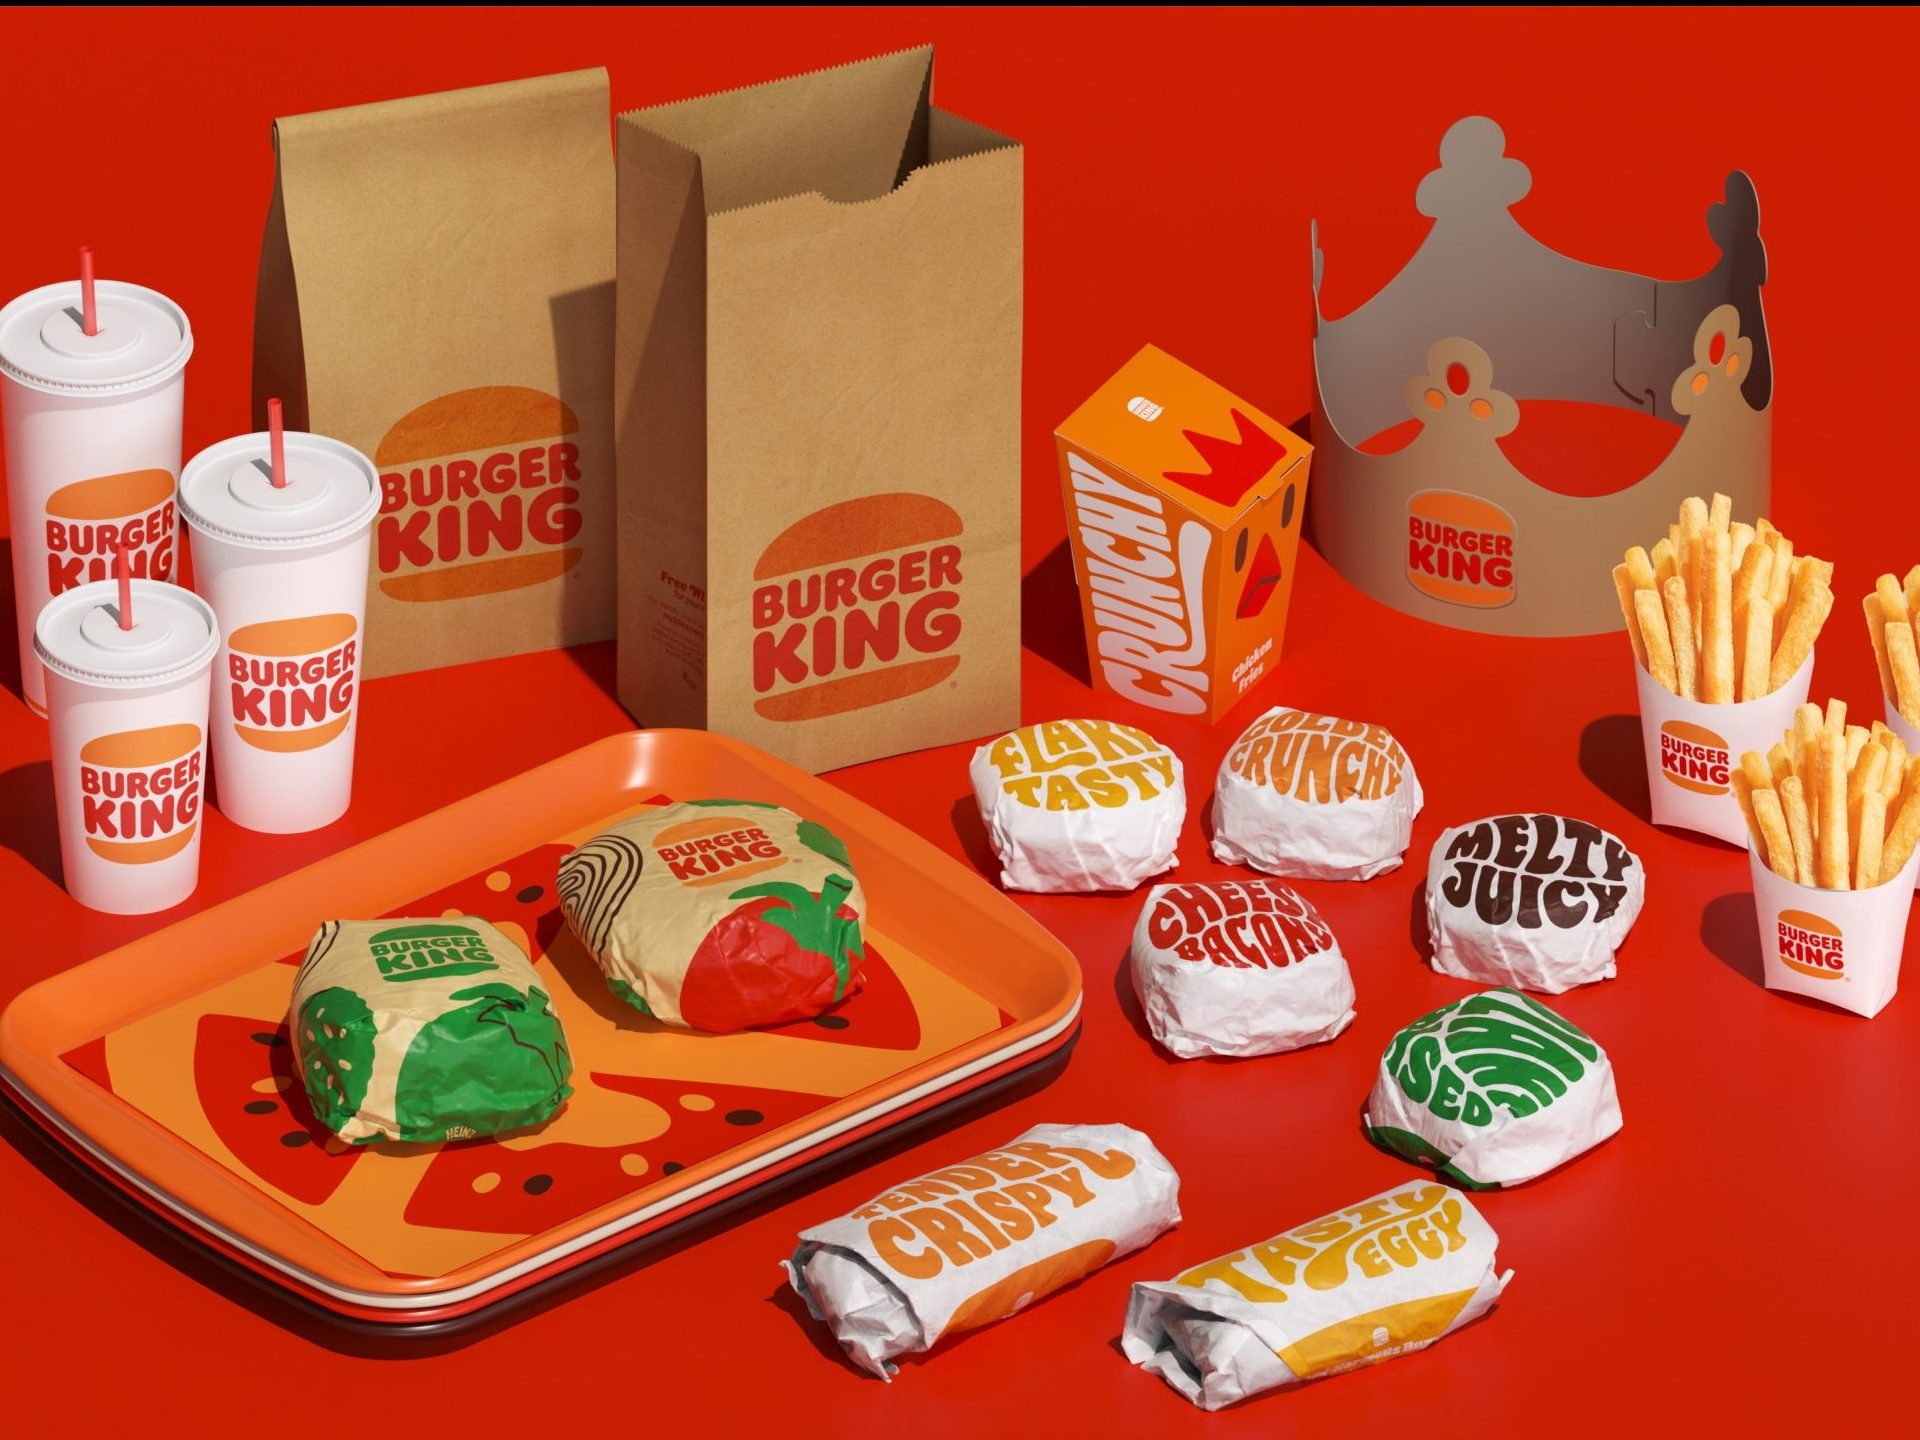 Burger King unveils new logo in brand redesign